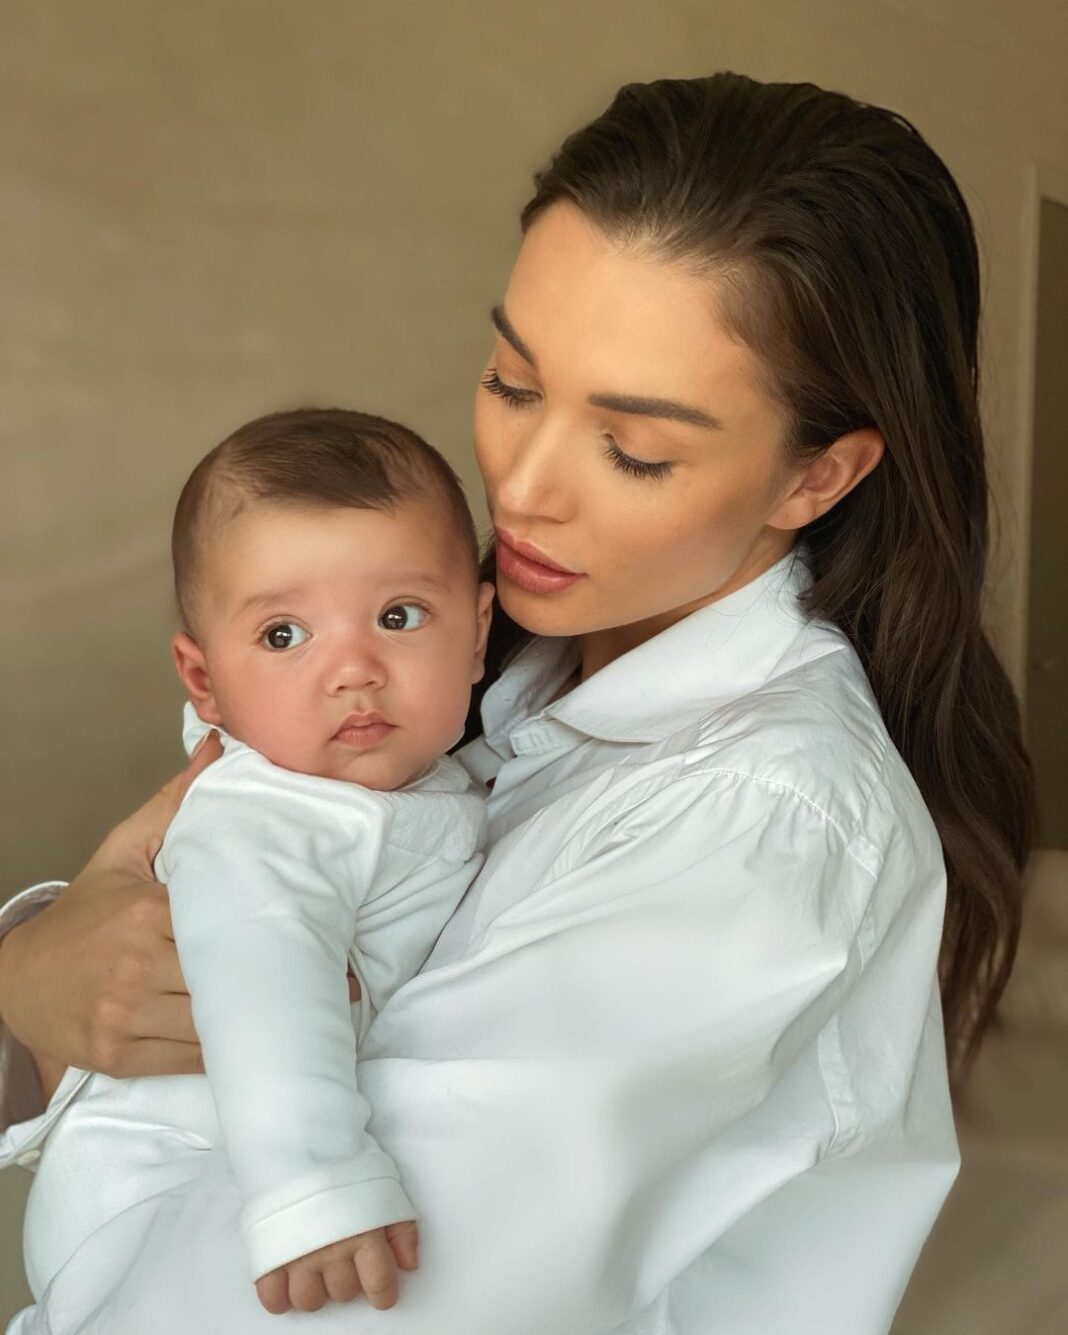 Amy Jackson Instagram - 4 months old today. It’s hard to remember what life was like before you my baby. You are the most amazing little human and I’m so blessed to be your Mummy ♾ ❤️